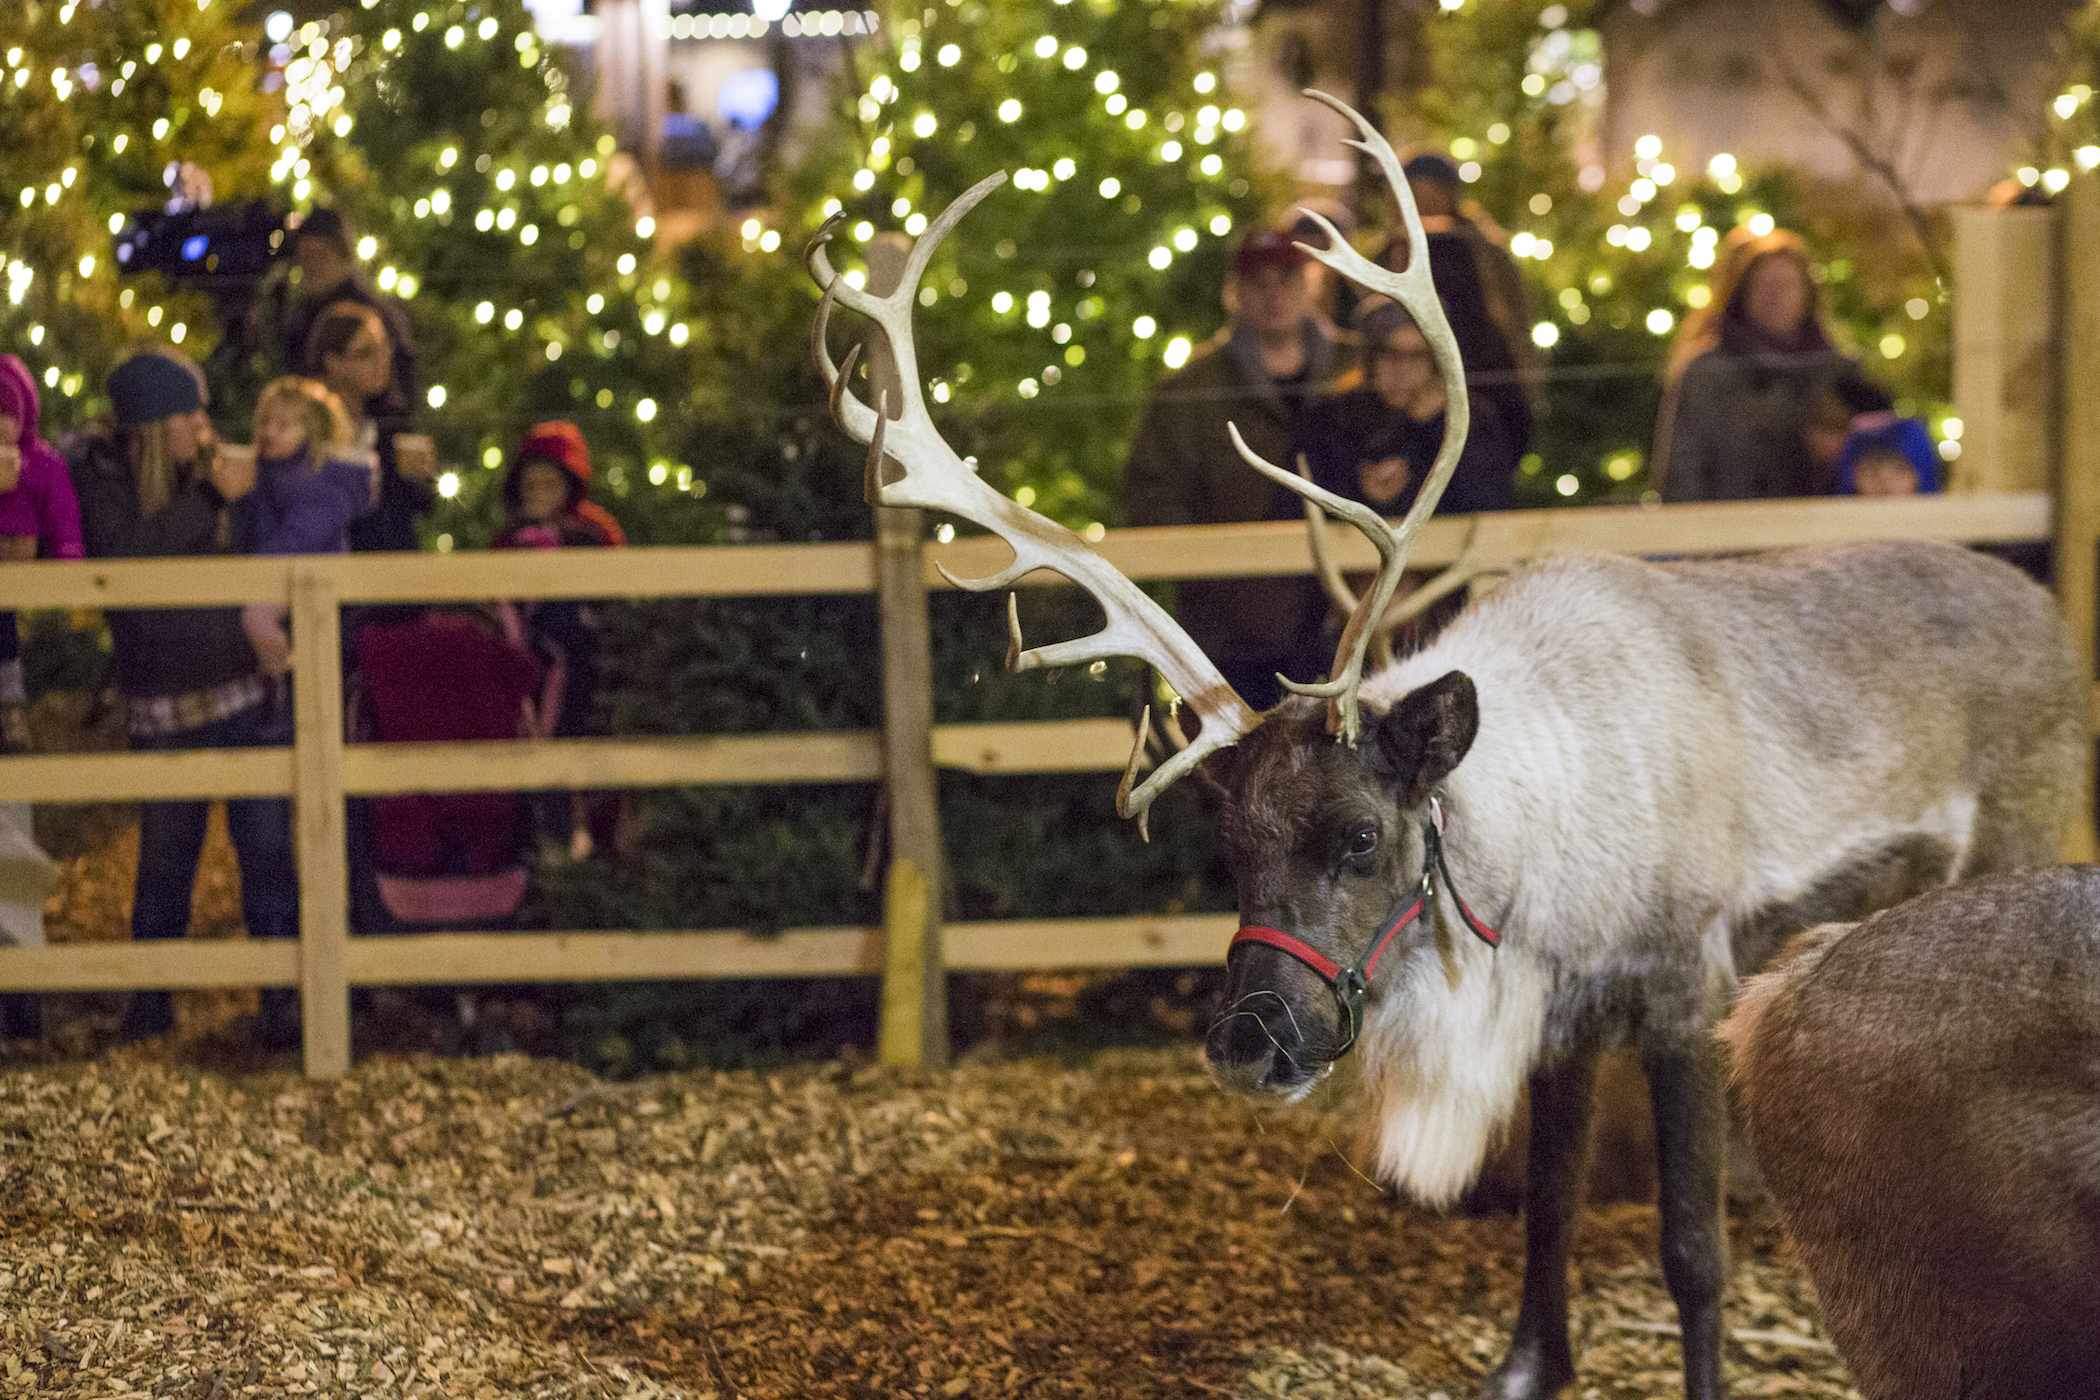 Santa and his reindeer are one of many sights at L.L.Bean's annual Northern Lights Celebration in Freeport, November 16-December 31.